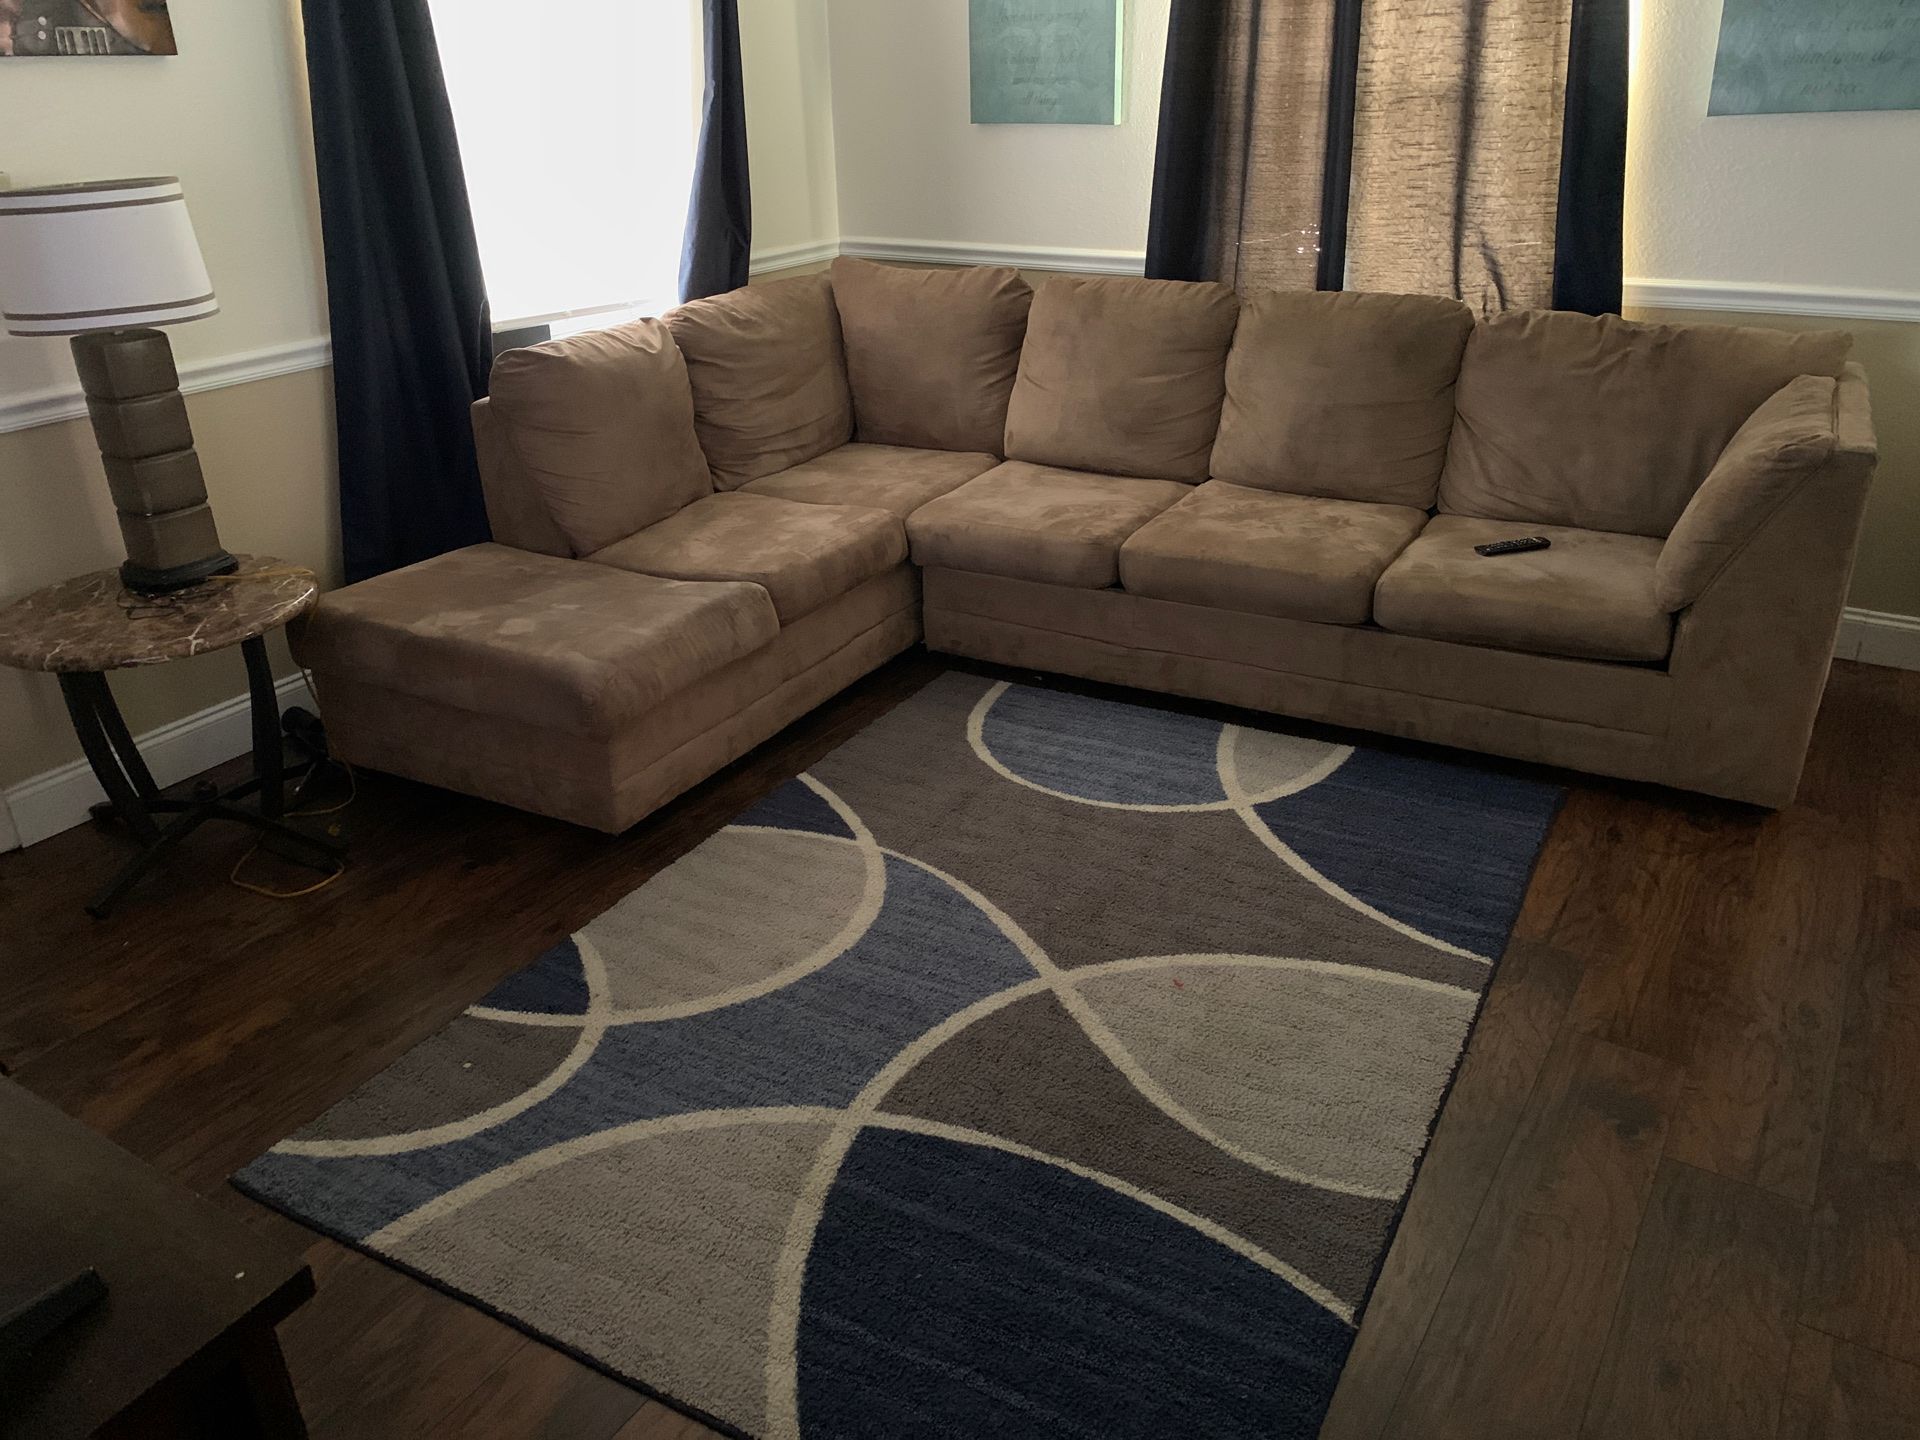 Sectional couch and rug